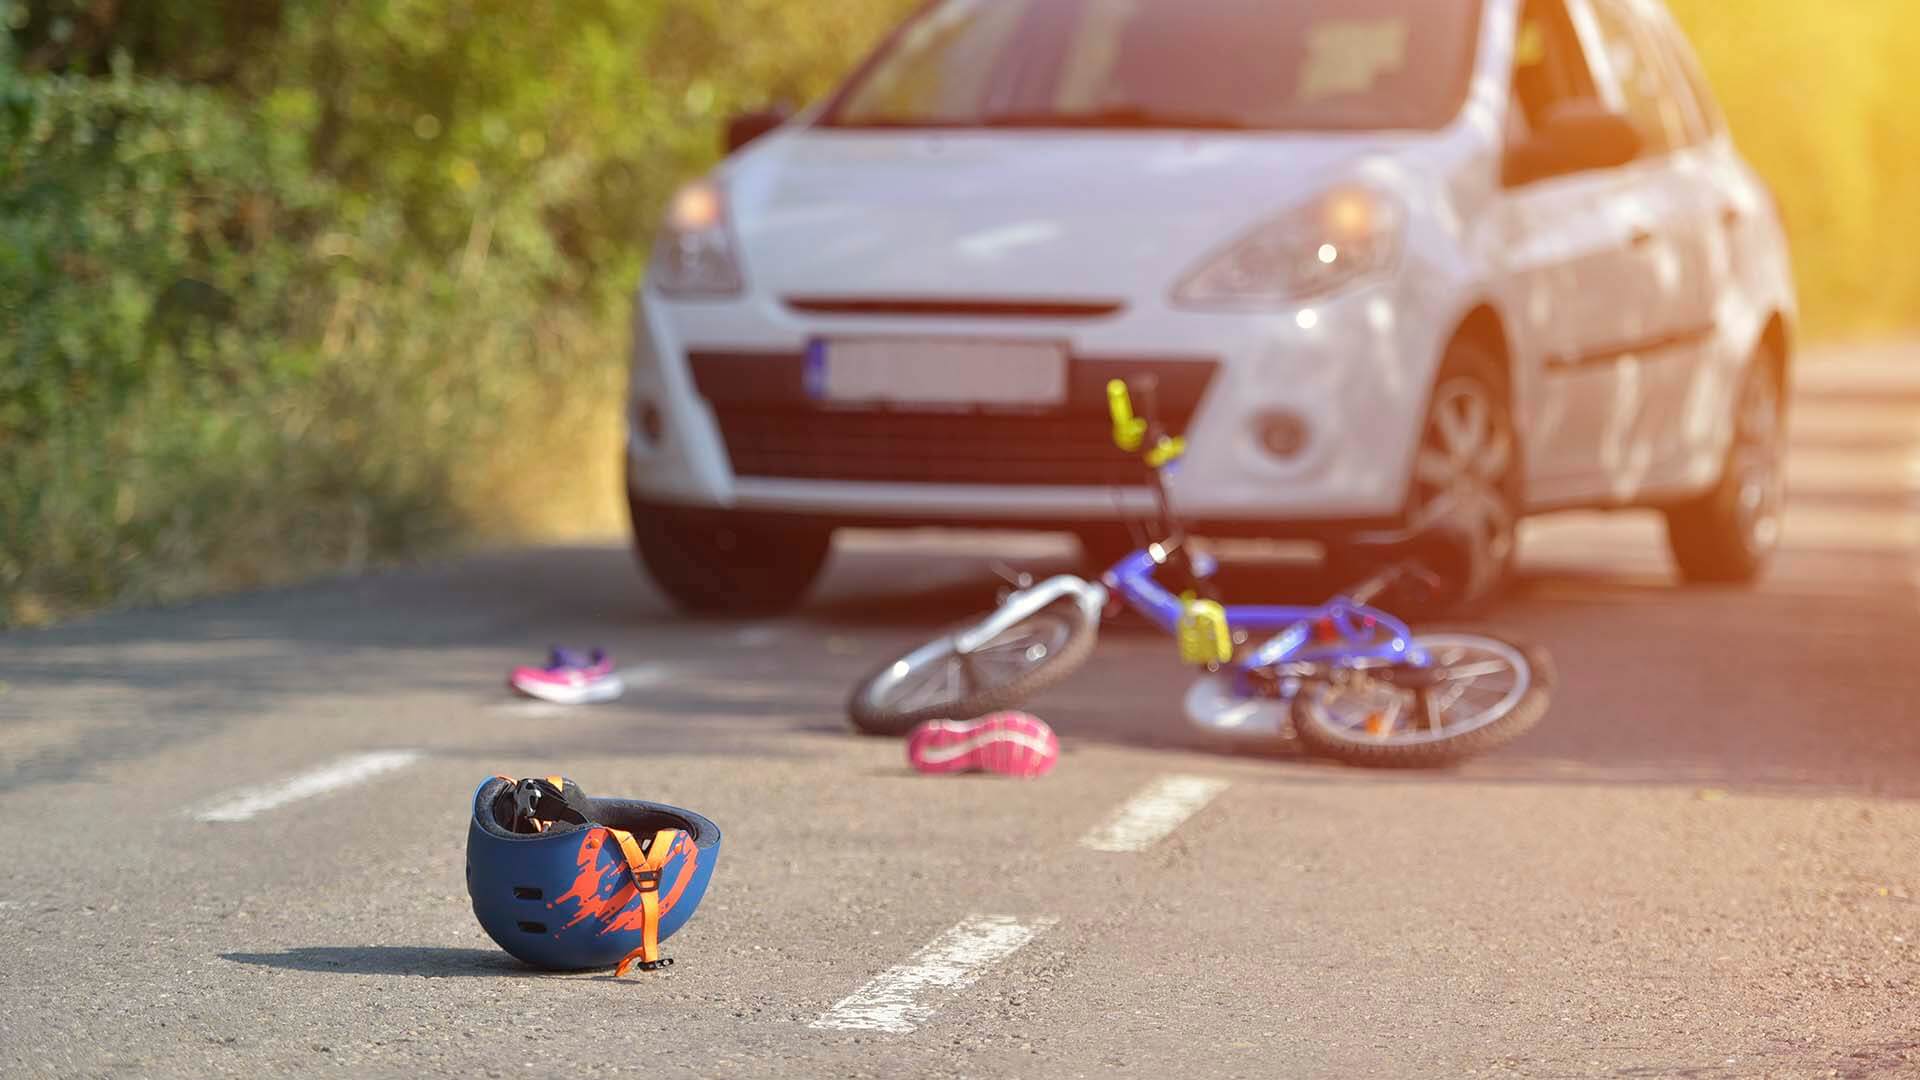 A bicycle and helmet laying on the road after rider was hit by a car